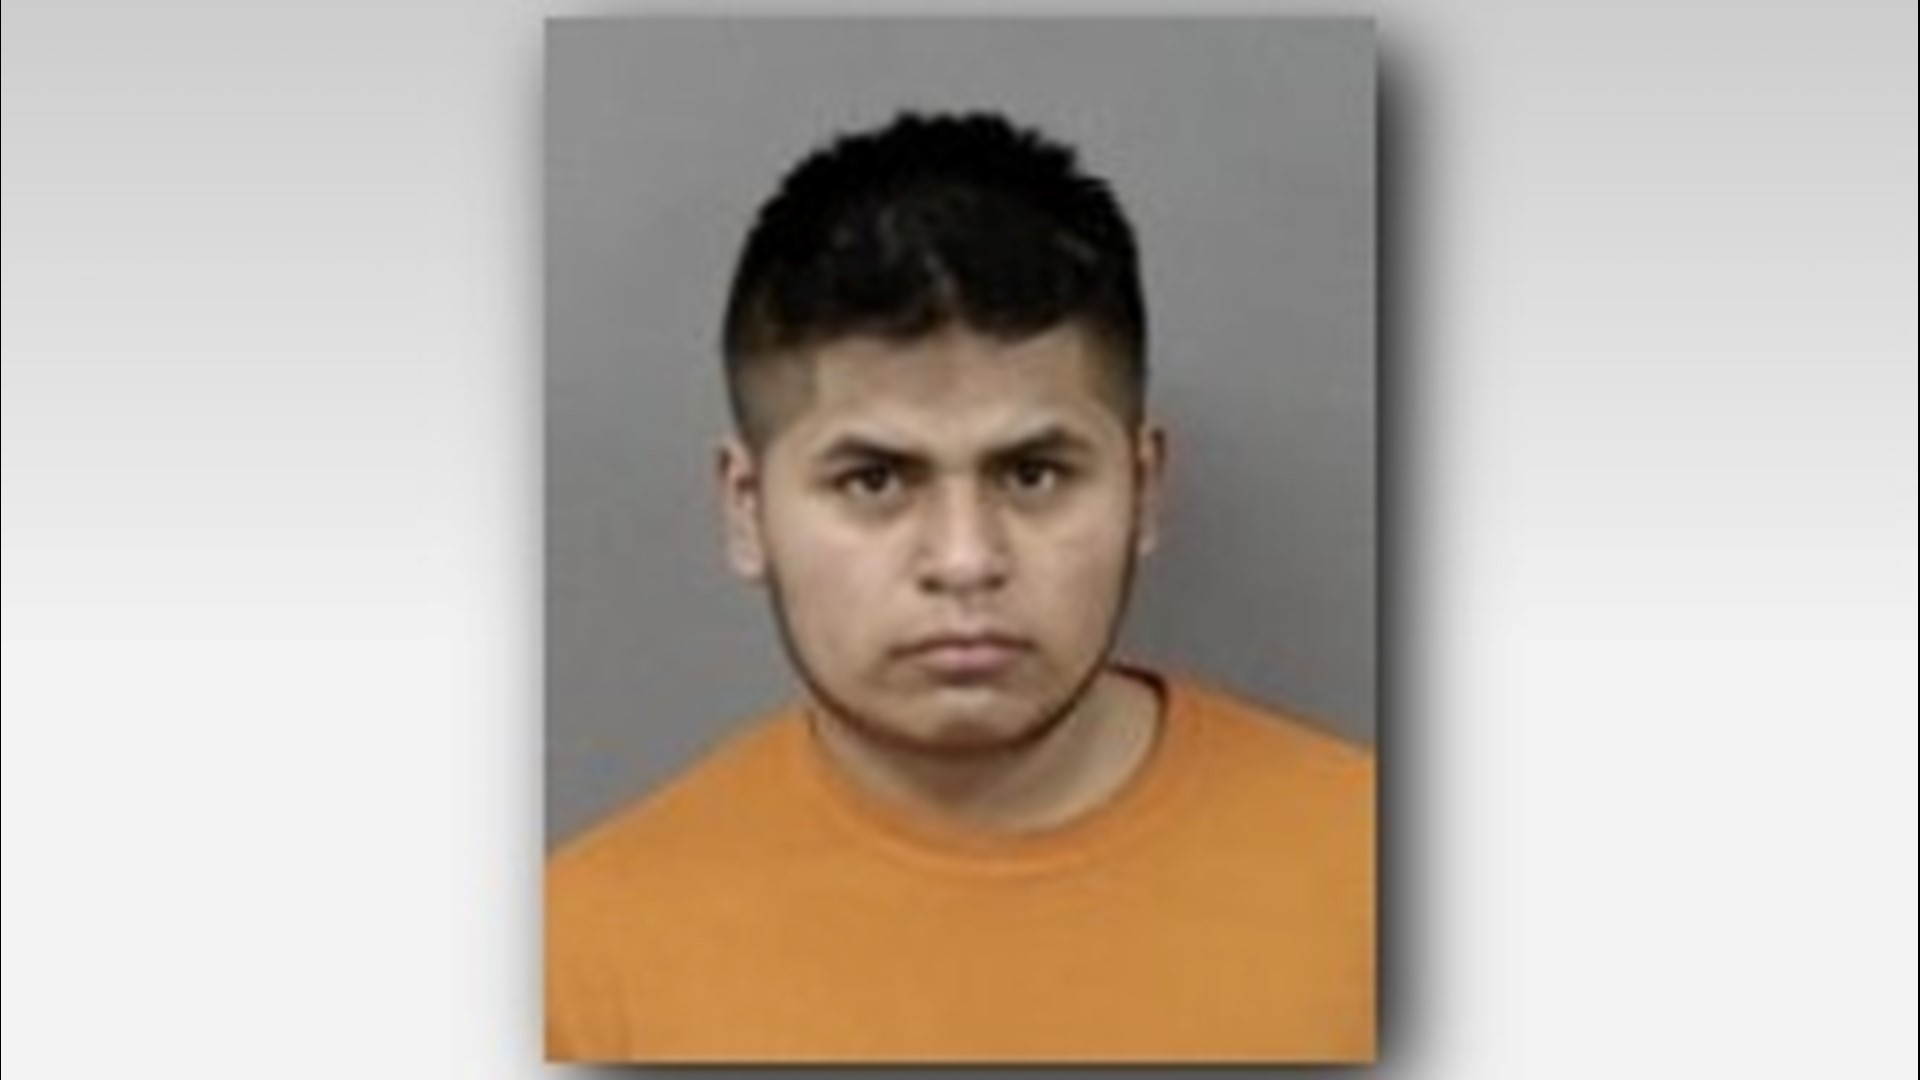 Prosecutors say Victor Ramirez Alvarez of Big Lake took the 2-year-old boy from the home of a woman he wanted to date while she was at work.